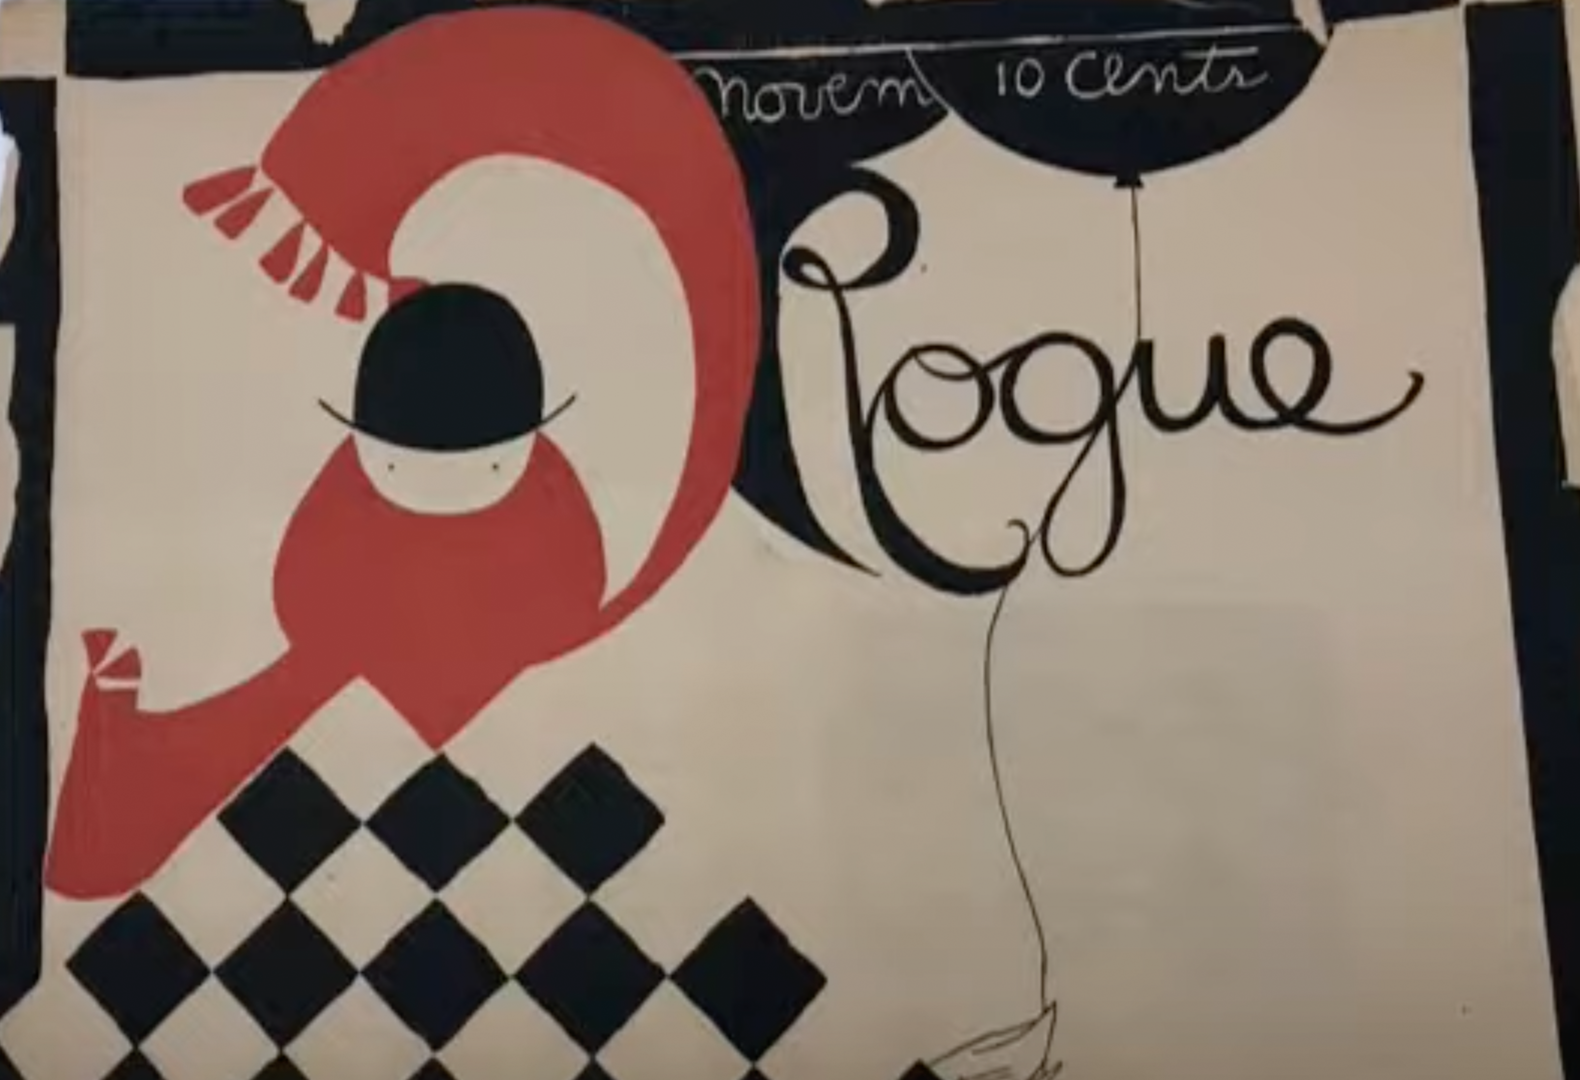 Rogue magazine cover with a drawn woman in a red scarf with a black and white checkerboard skirt.